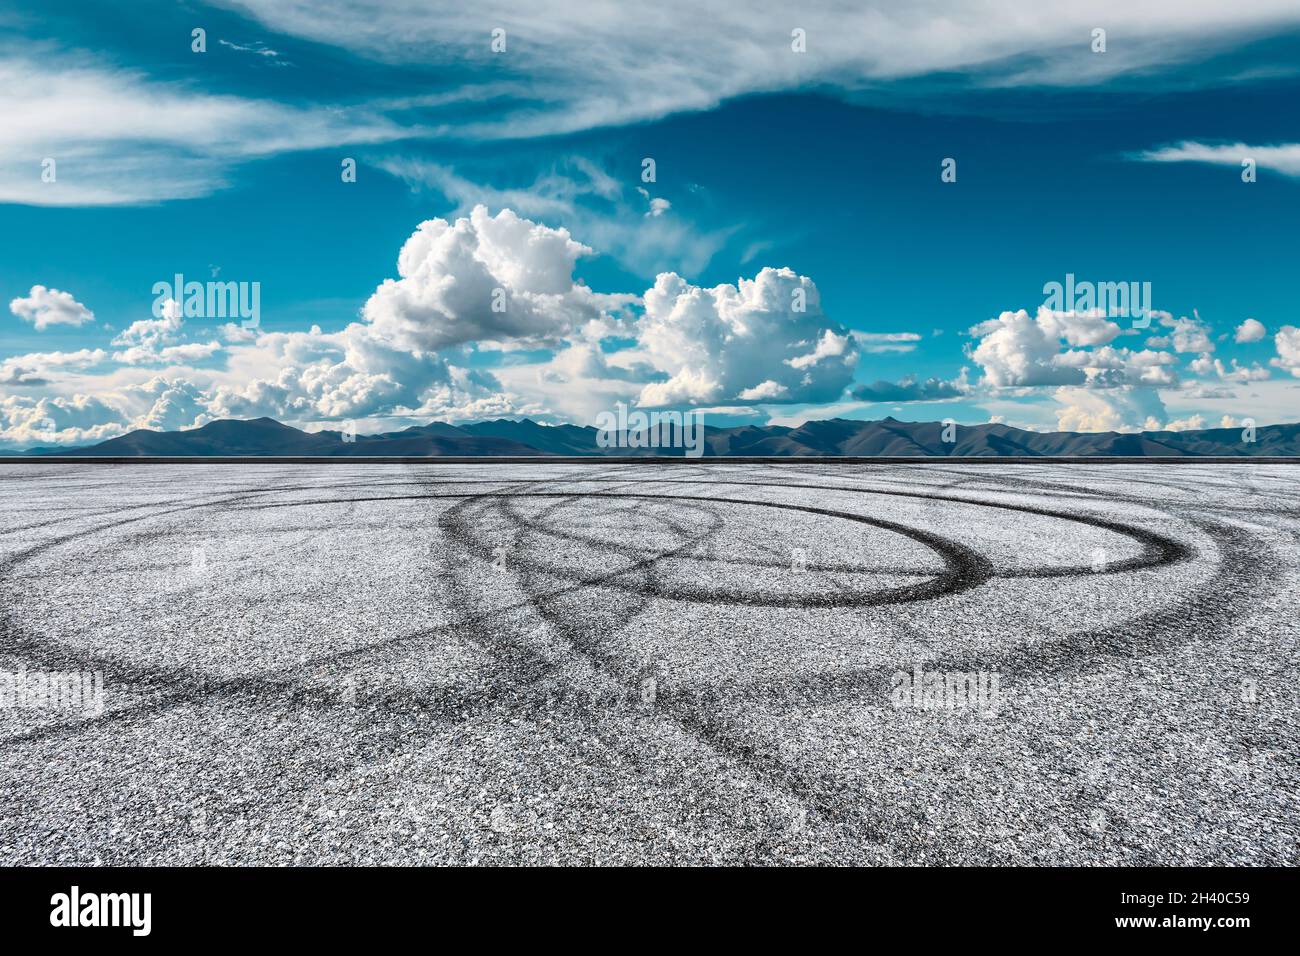 Race track and mountain with sky cloud natural scenery. Stock Photo